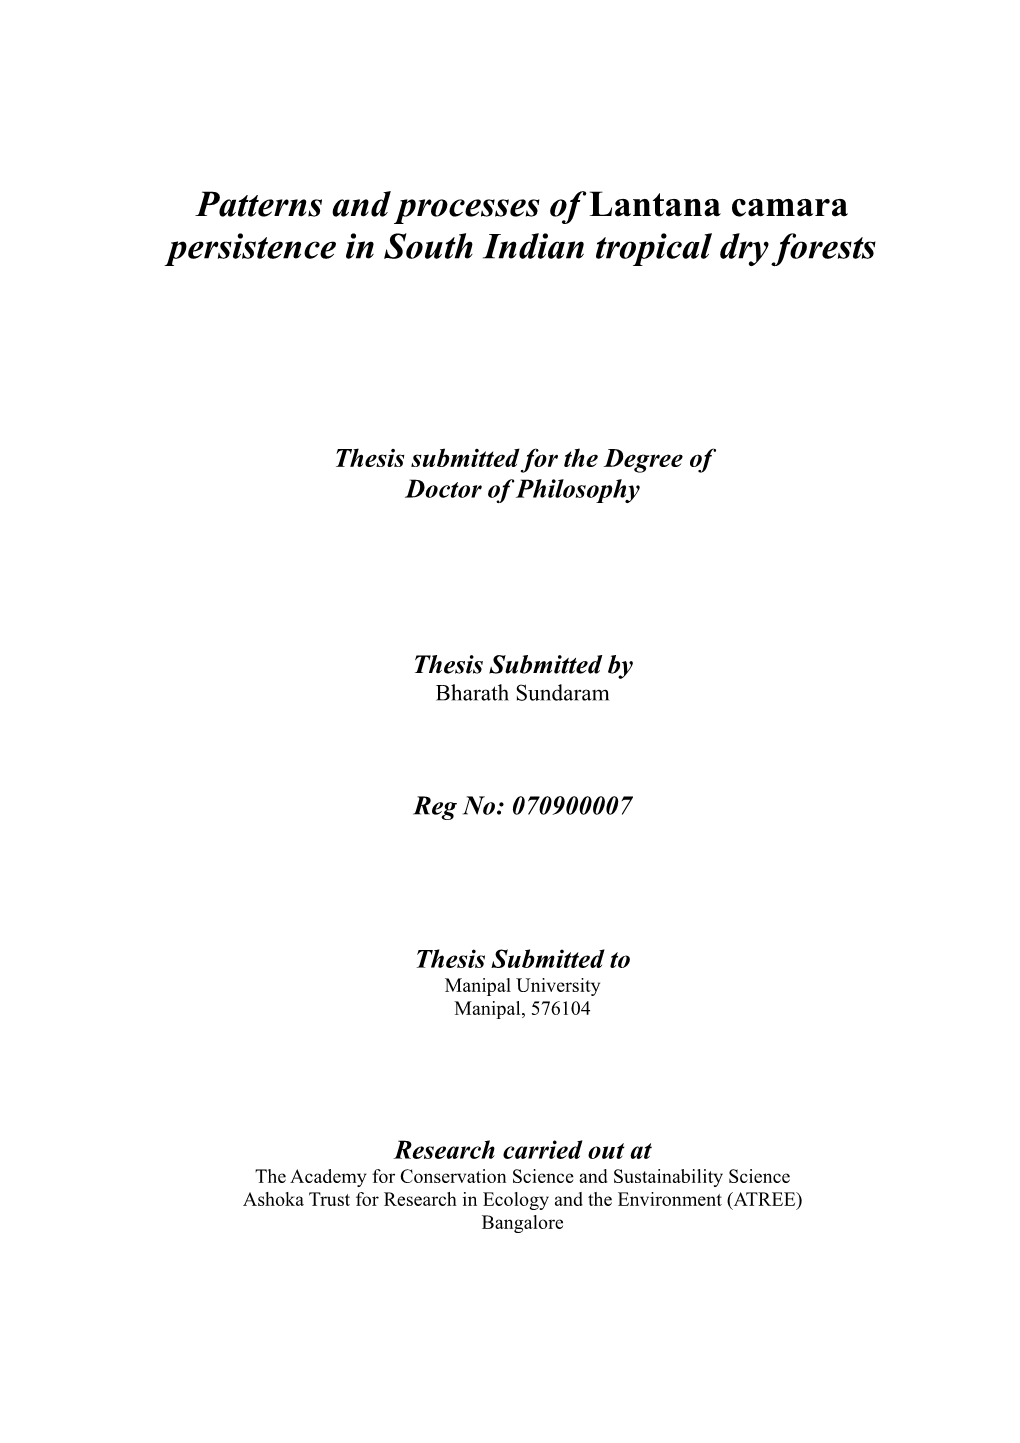 Patterns and Processes of Lantana Camara Persistence in South Indian Tropical Dry Forests